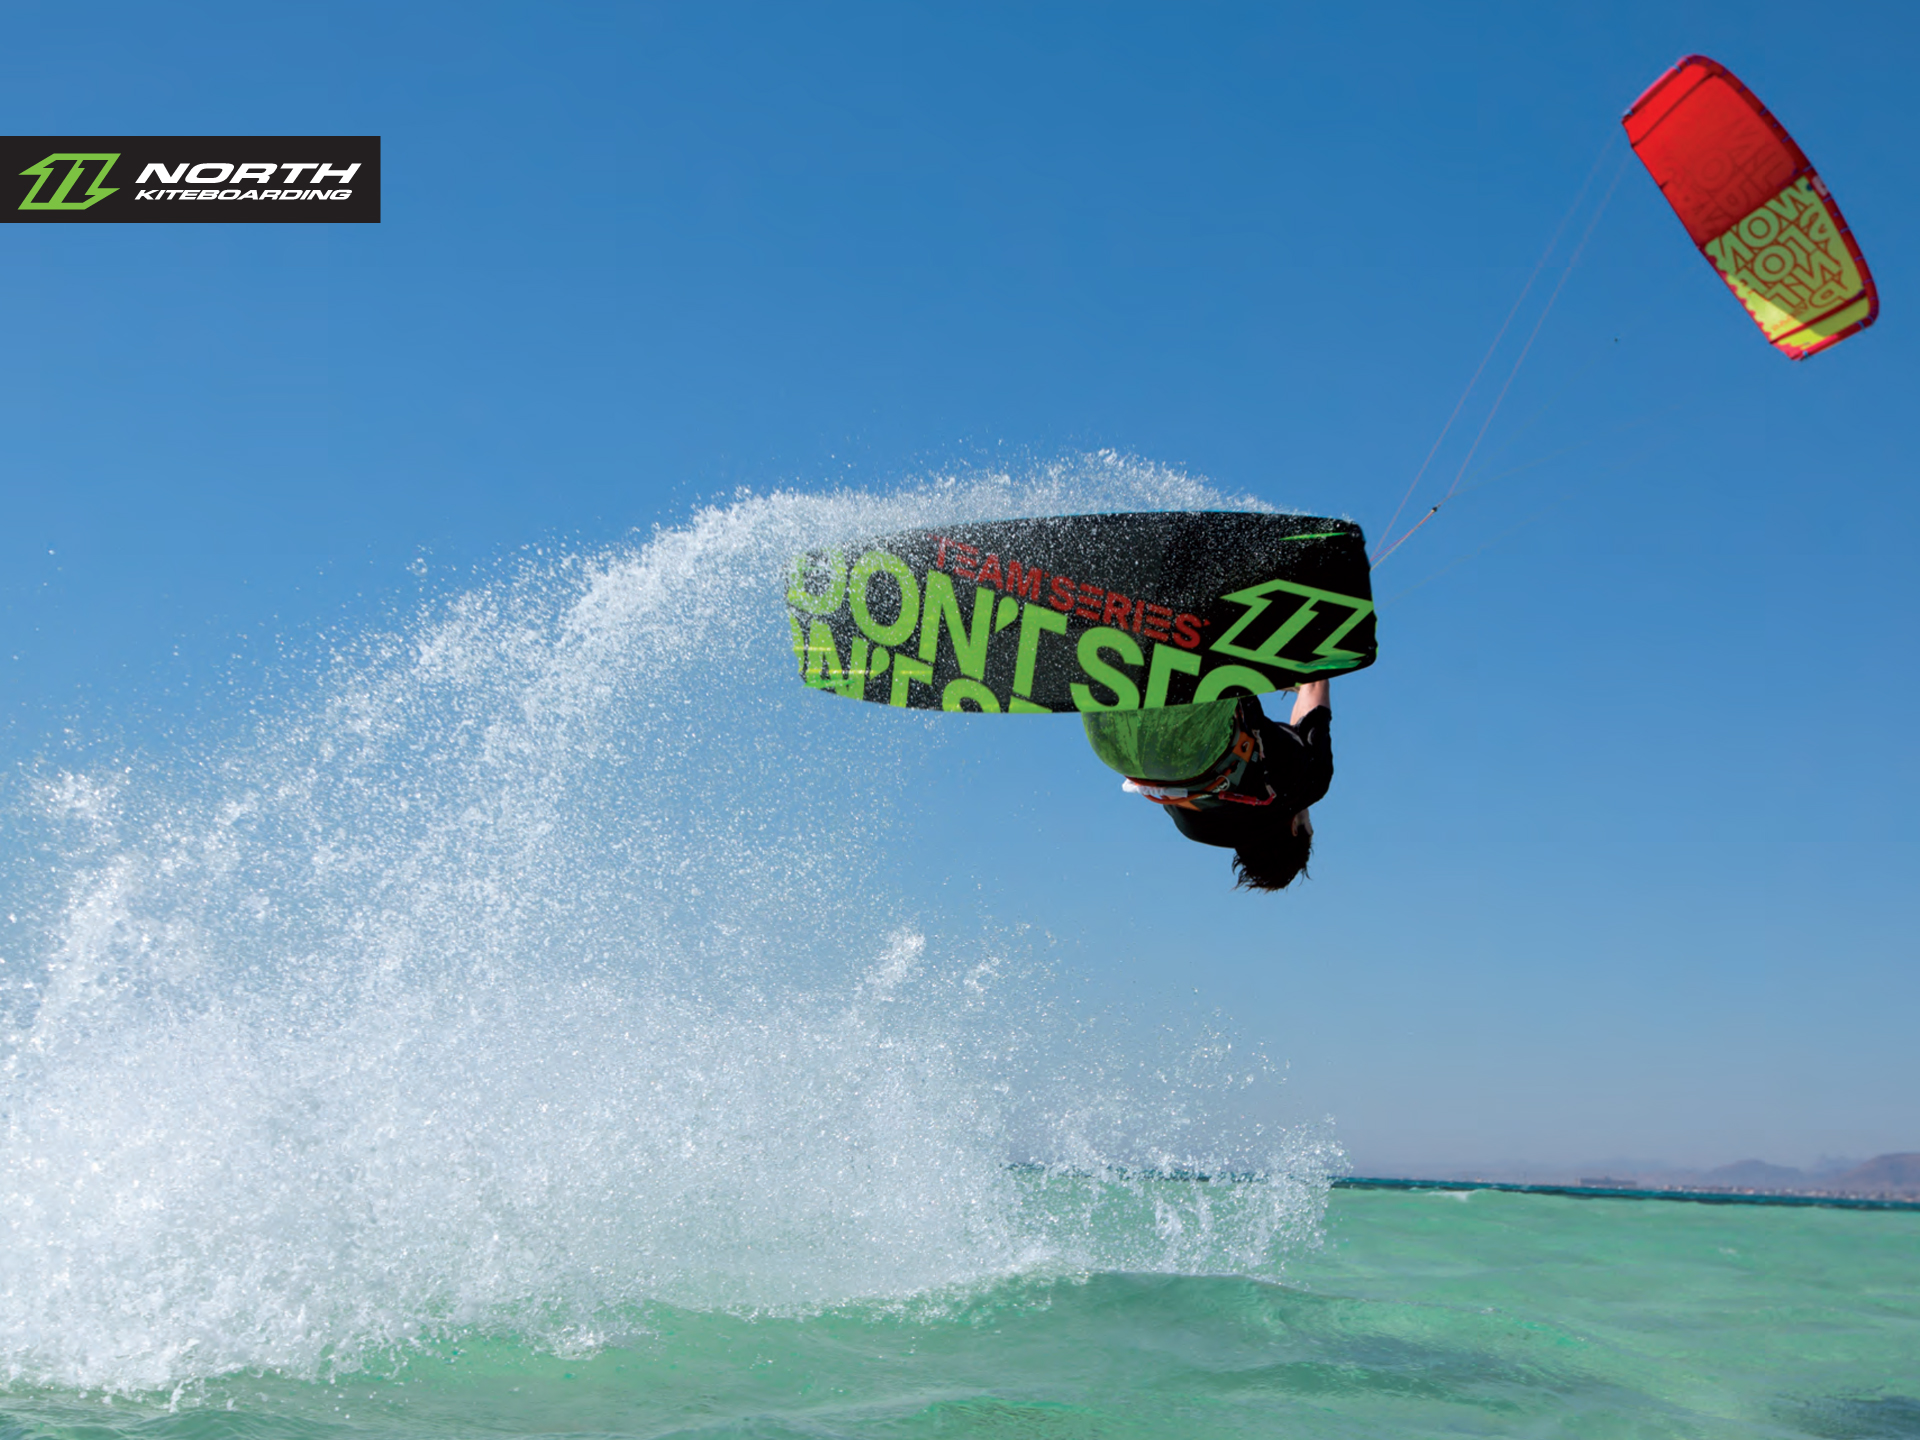 kitesurf wallpaper image - The 2015 North Vegas and team series board on holiday in the tropics - kitesurfing - in resolution: Standard 4:3 1920 X 1440